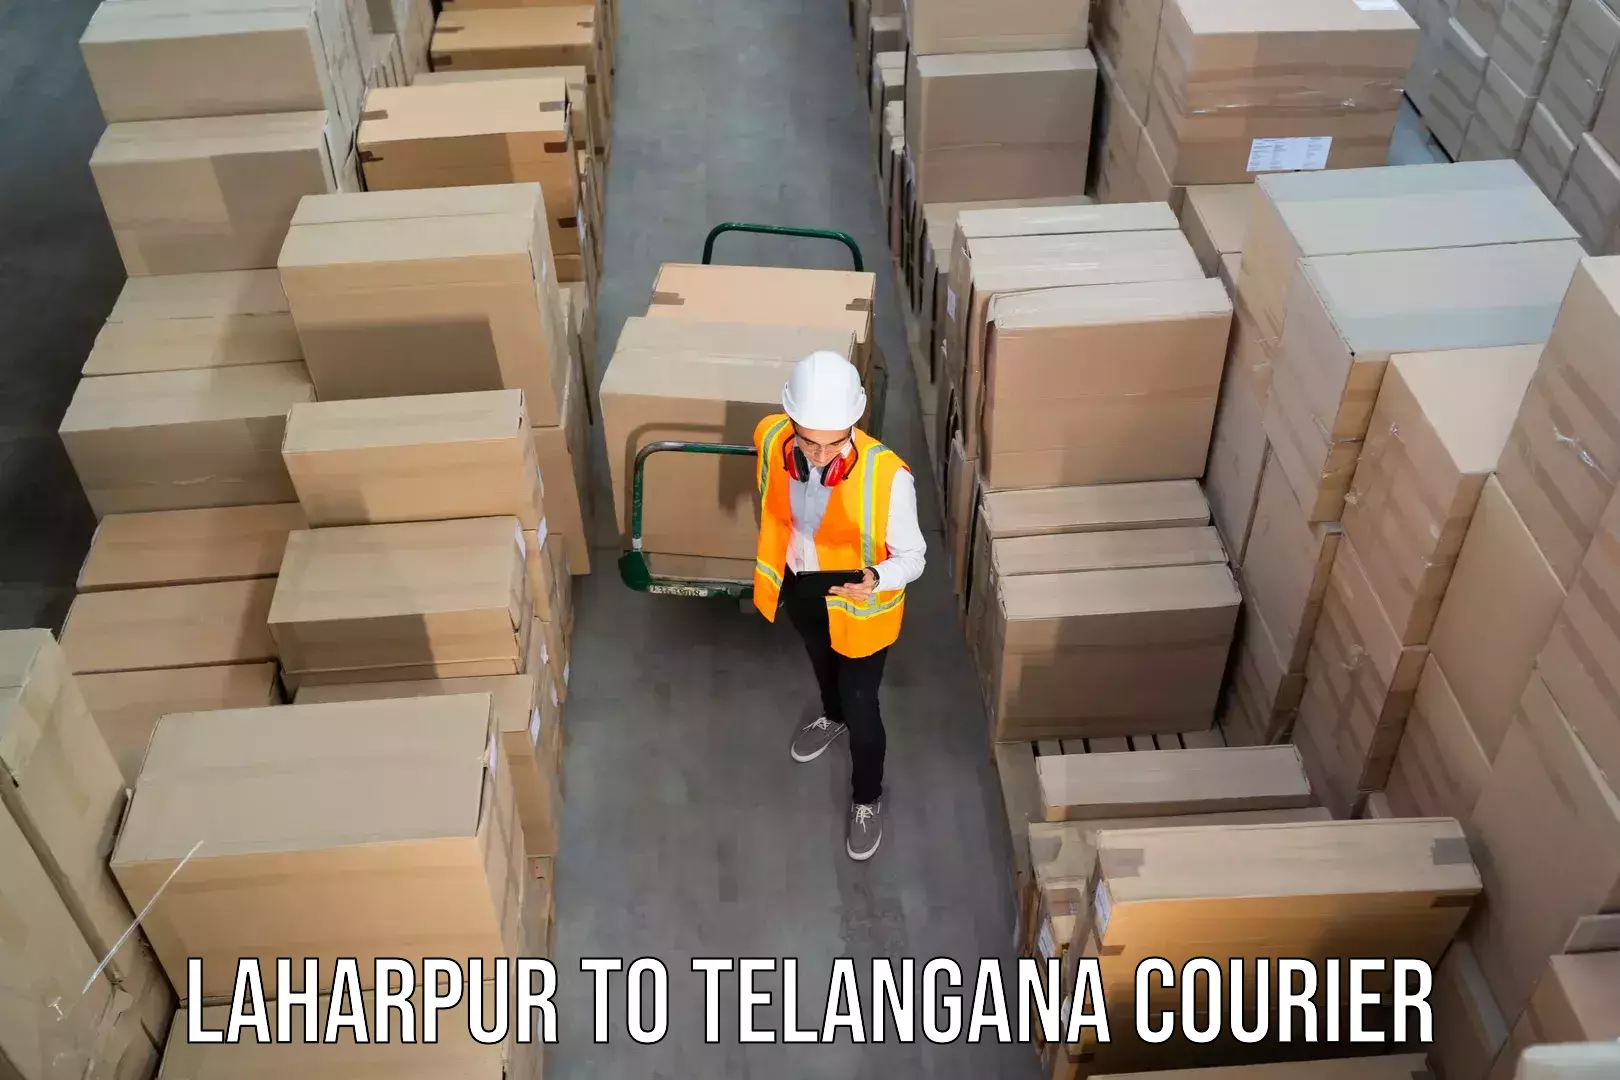 Global shipping networks Laharpur to Manneguda